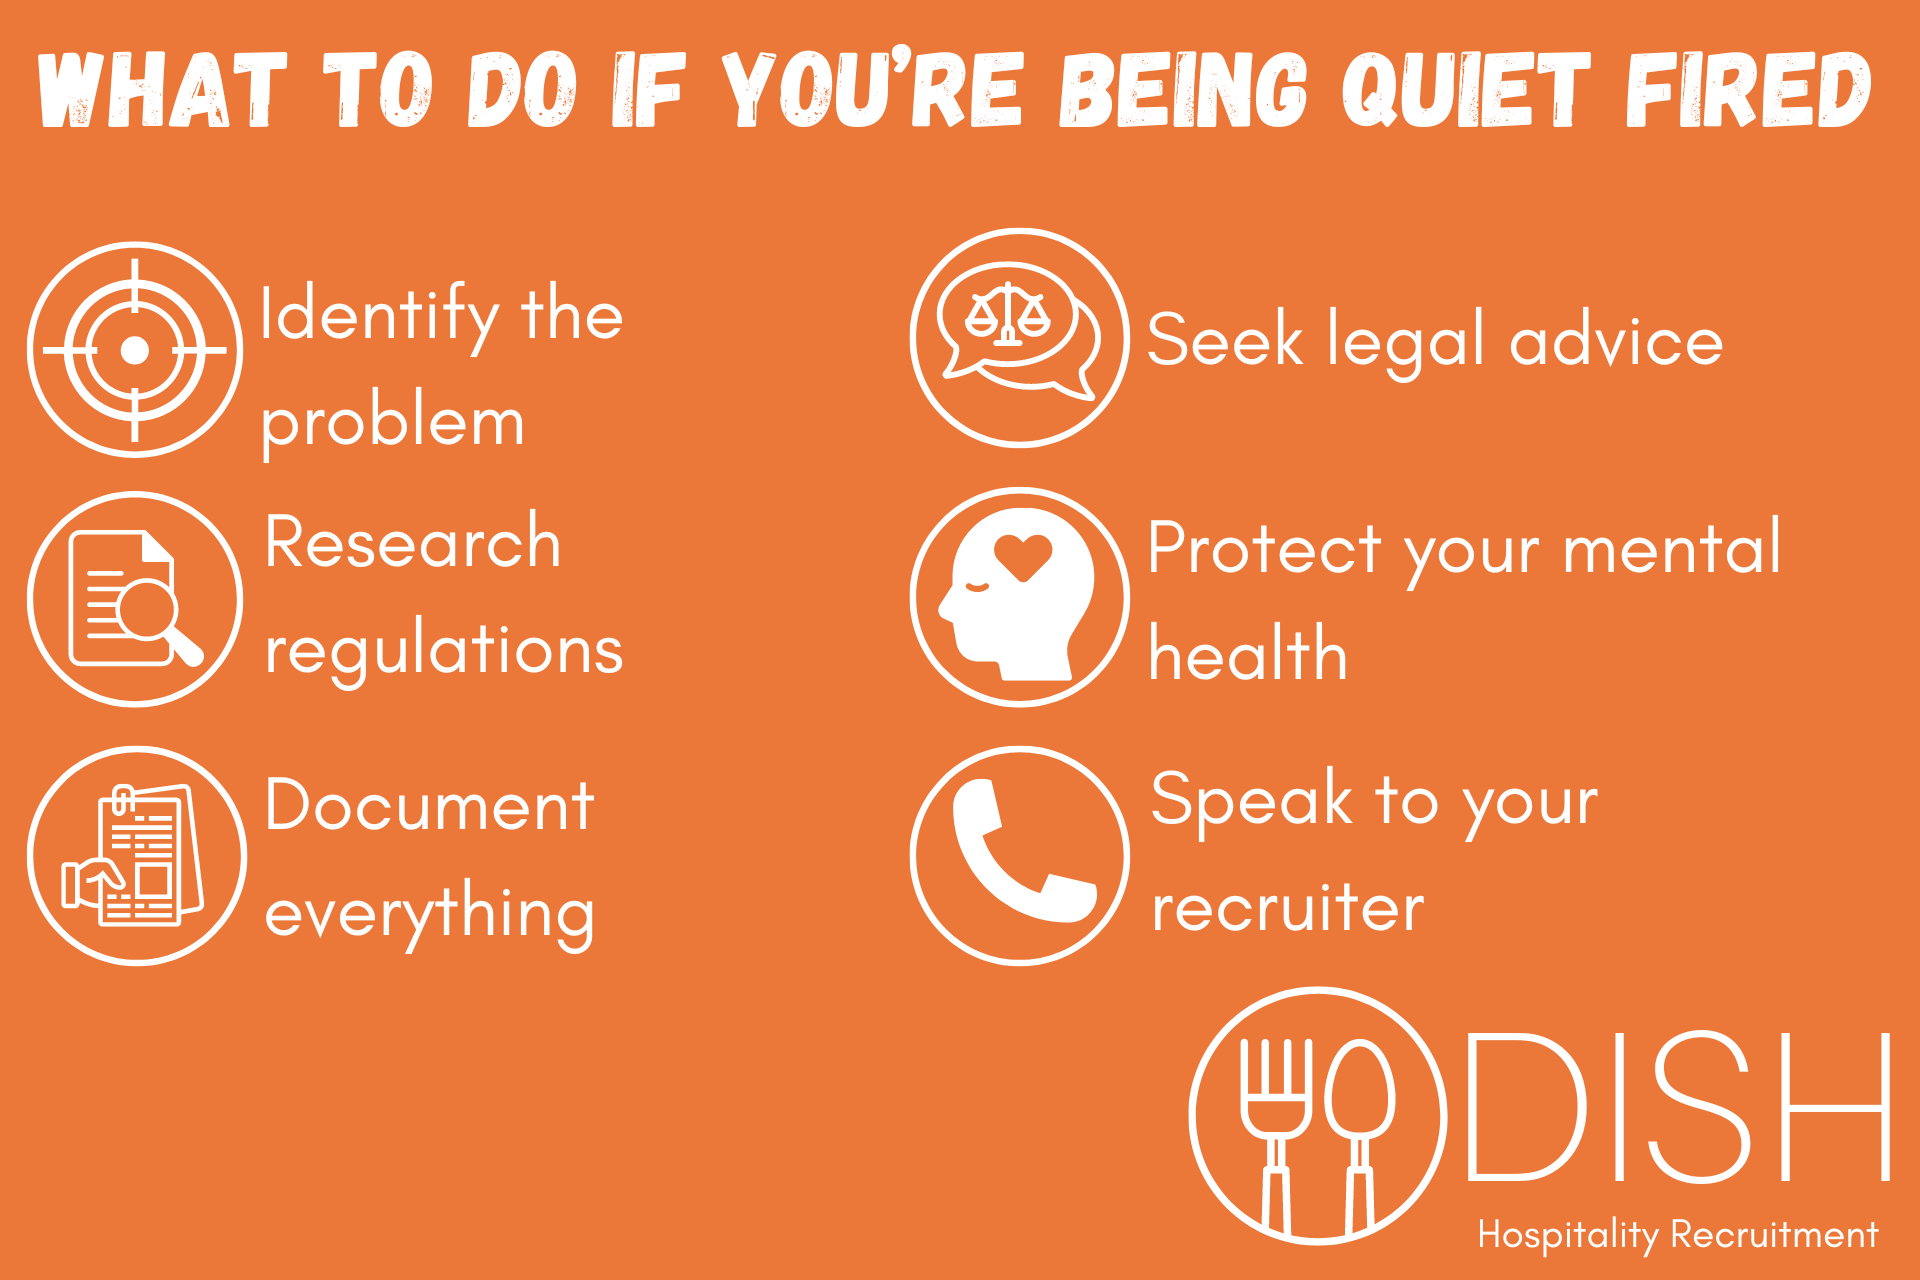 What To Do if You’re Being Quiet Fired